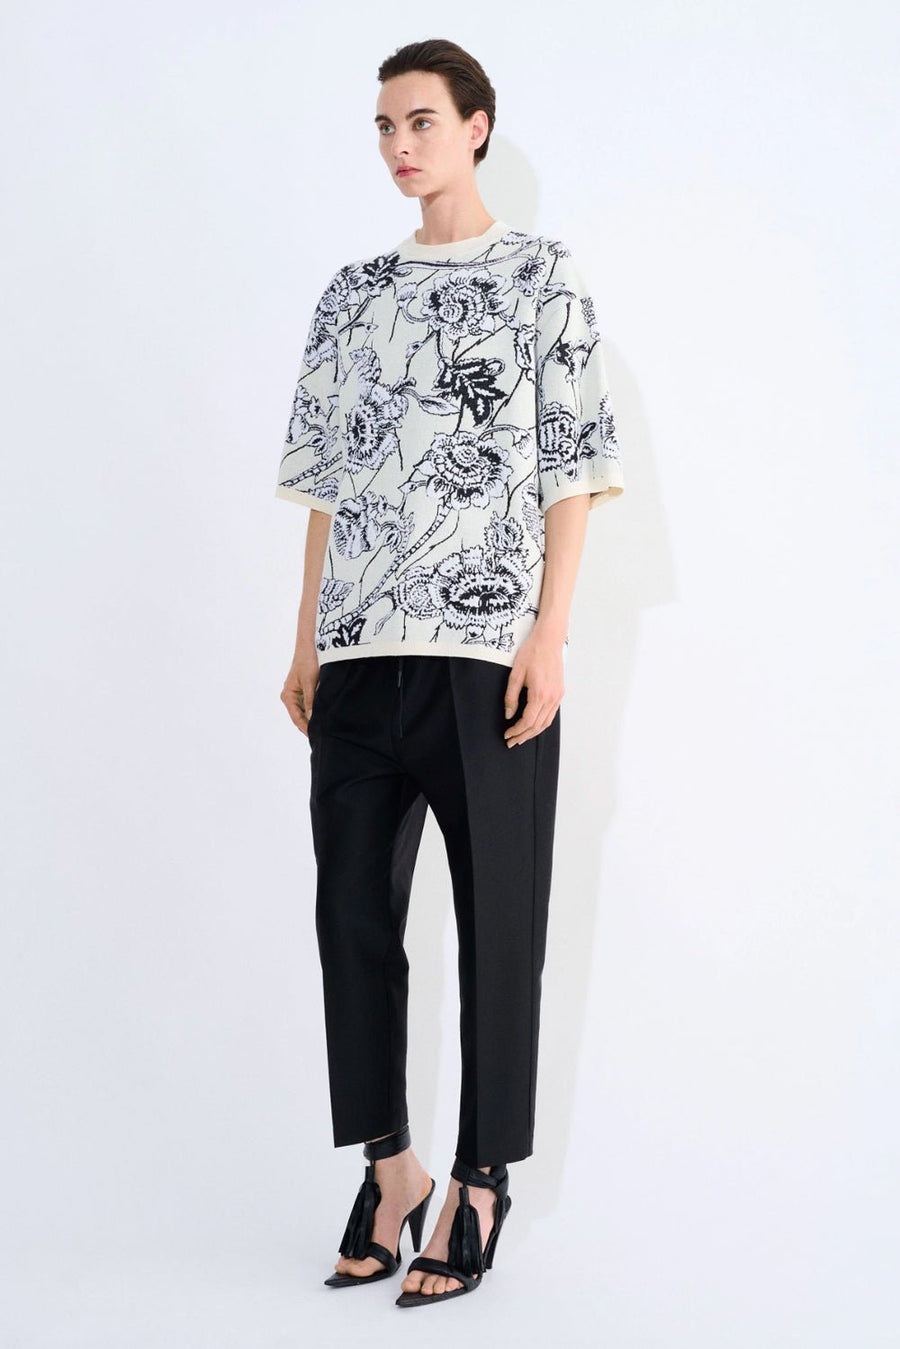 CHRISTIAN WIJNANTS Dianthus Jacquard Top in Off-White